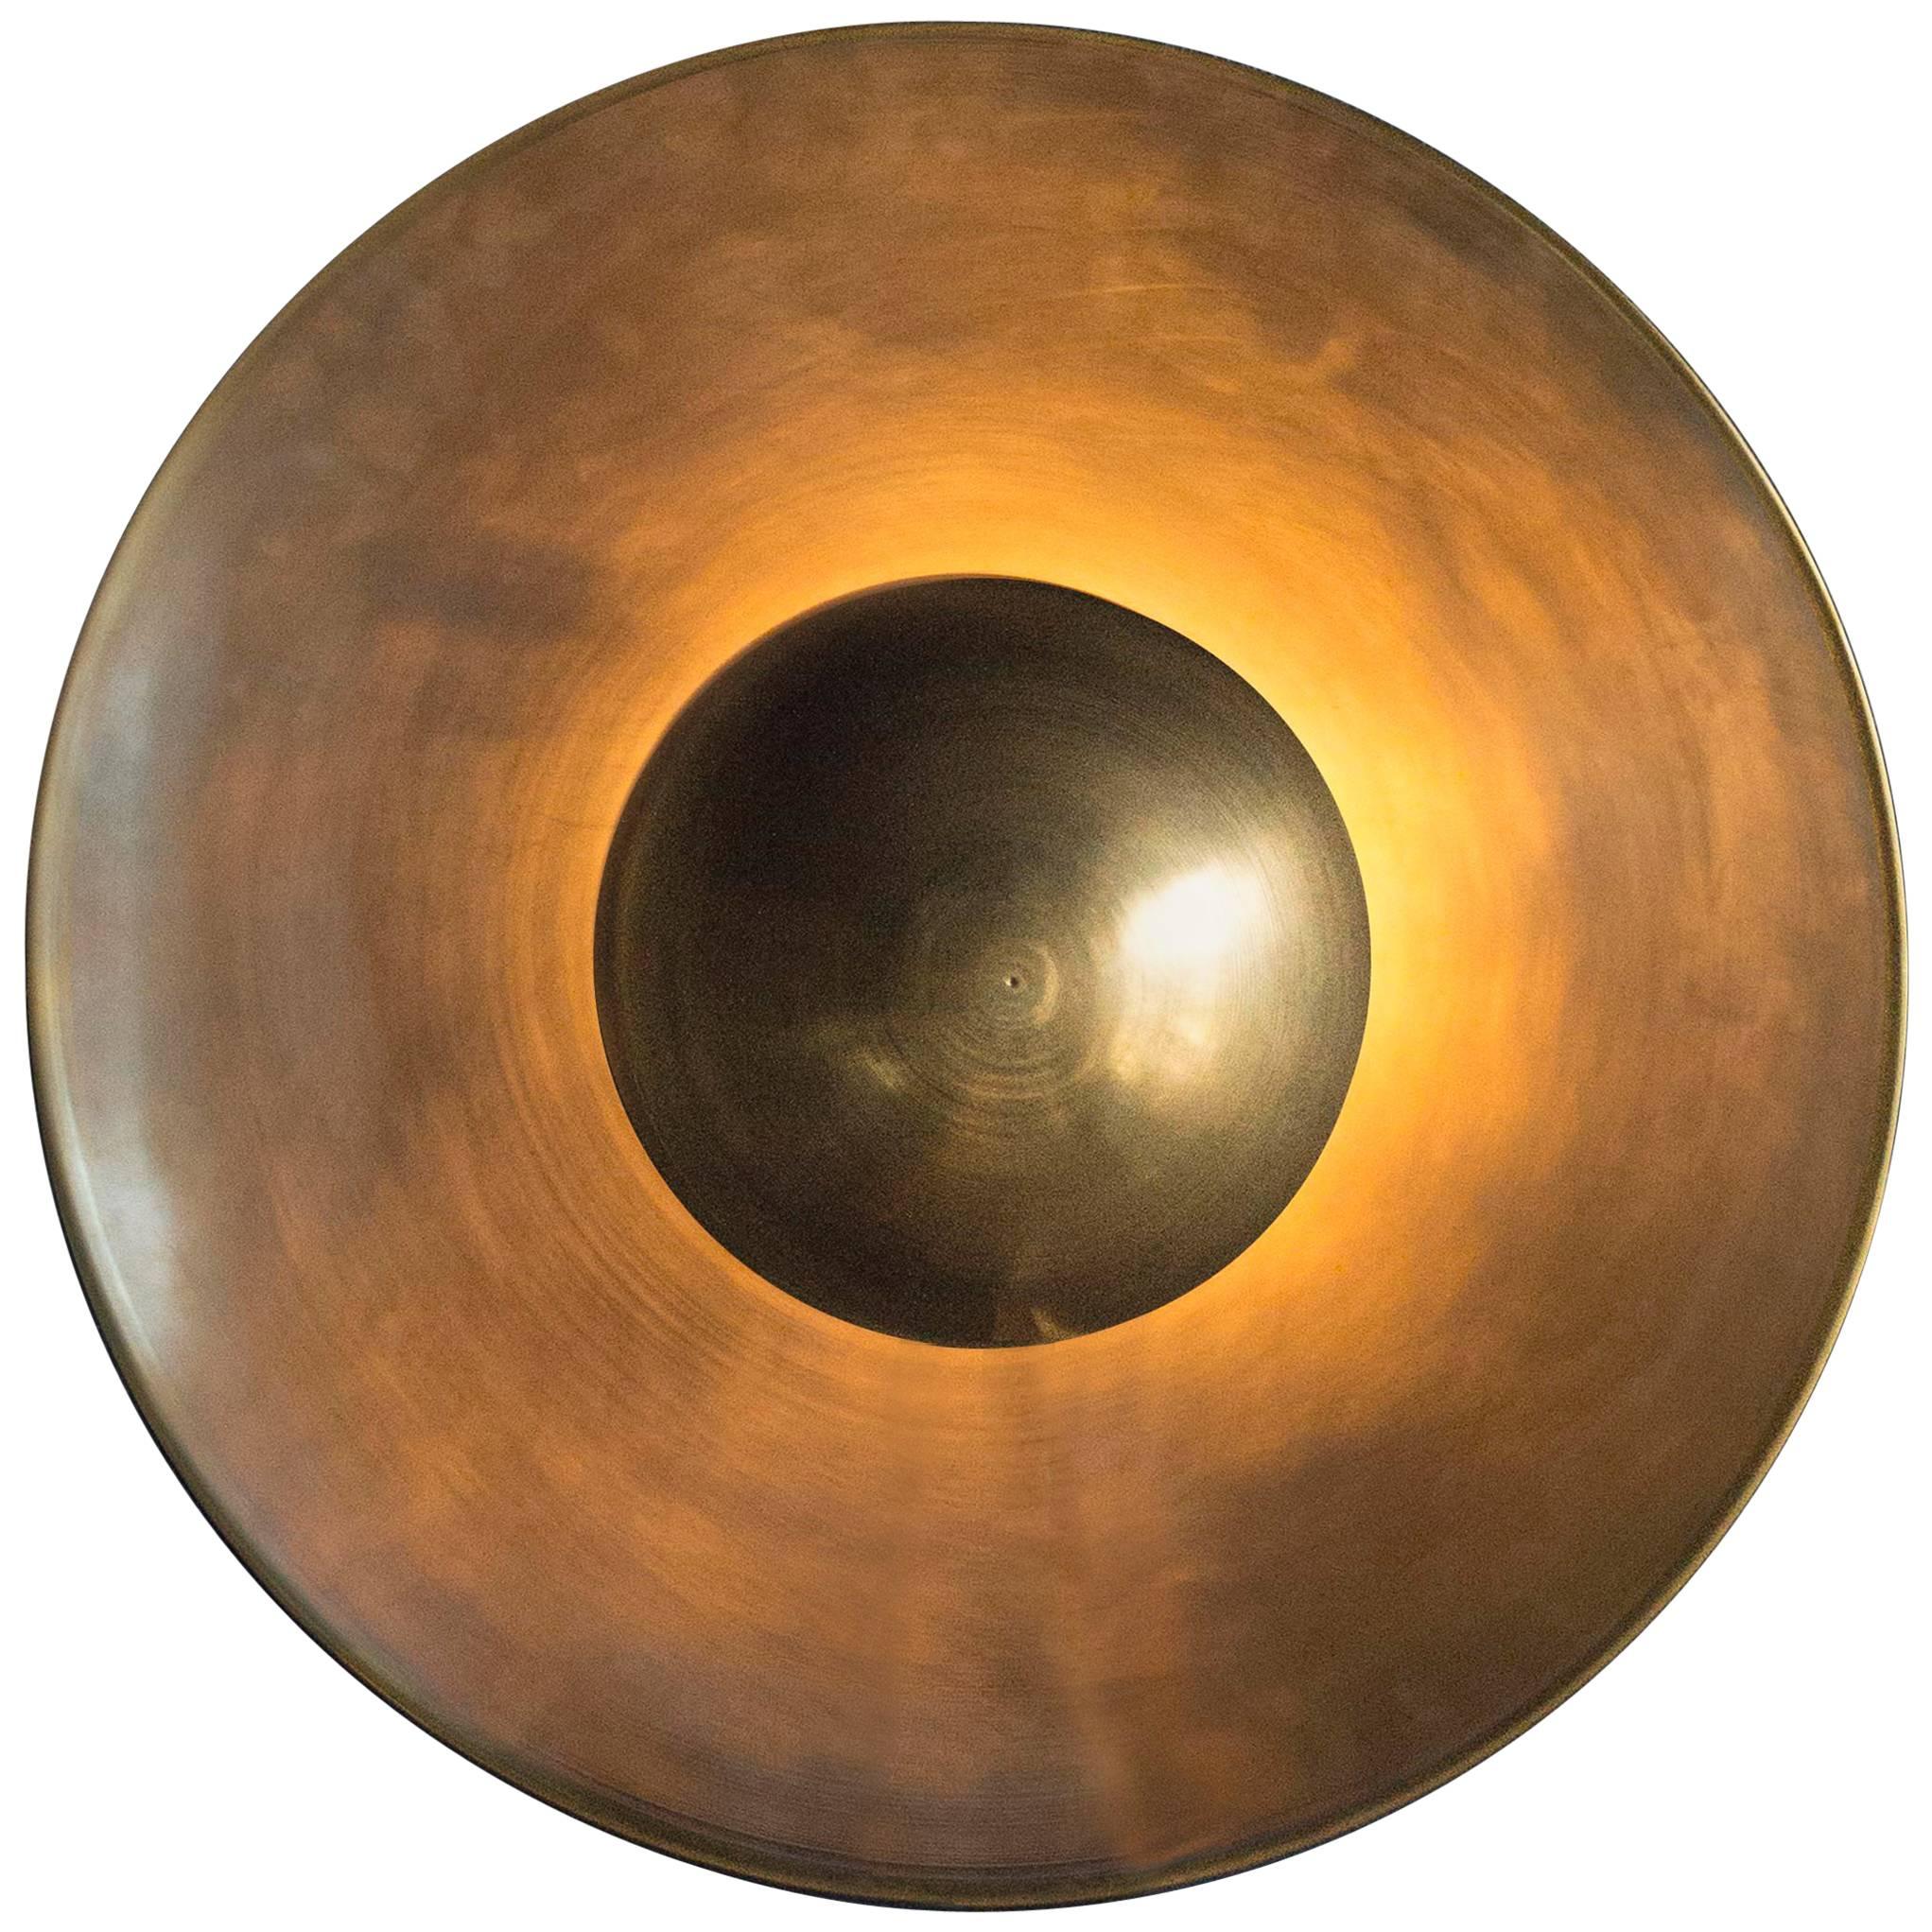 Metropolis brass sconce lamp by Jan Garncarek

Dimensions: 36 x 36 x 18 cm
Material: Brass
Handcrafted by Jan Garncarek.
Signed and numbered

Information:
weight: 4 kg / 9 lb
voltage: 120V, 240V
lamping: 3 x E27, 60W, 50-60Hz
lumens:300